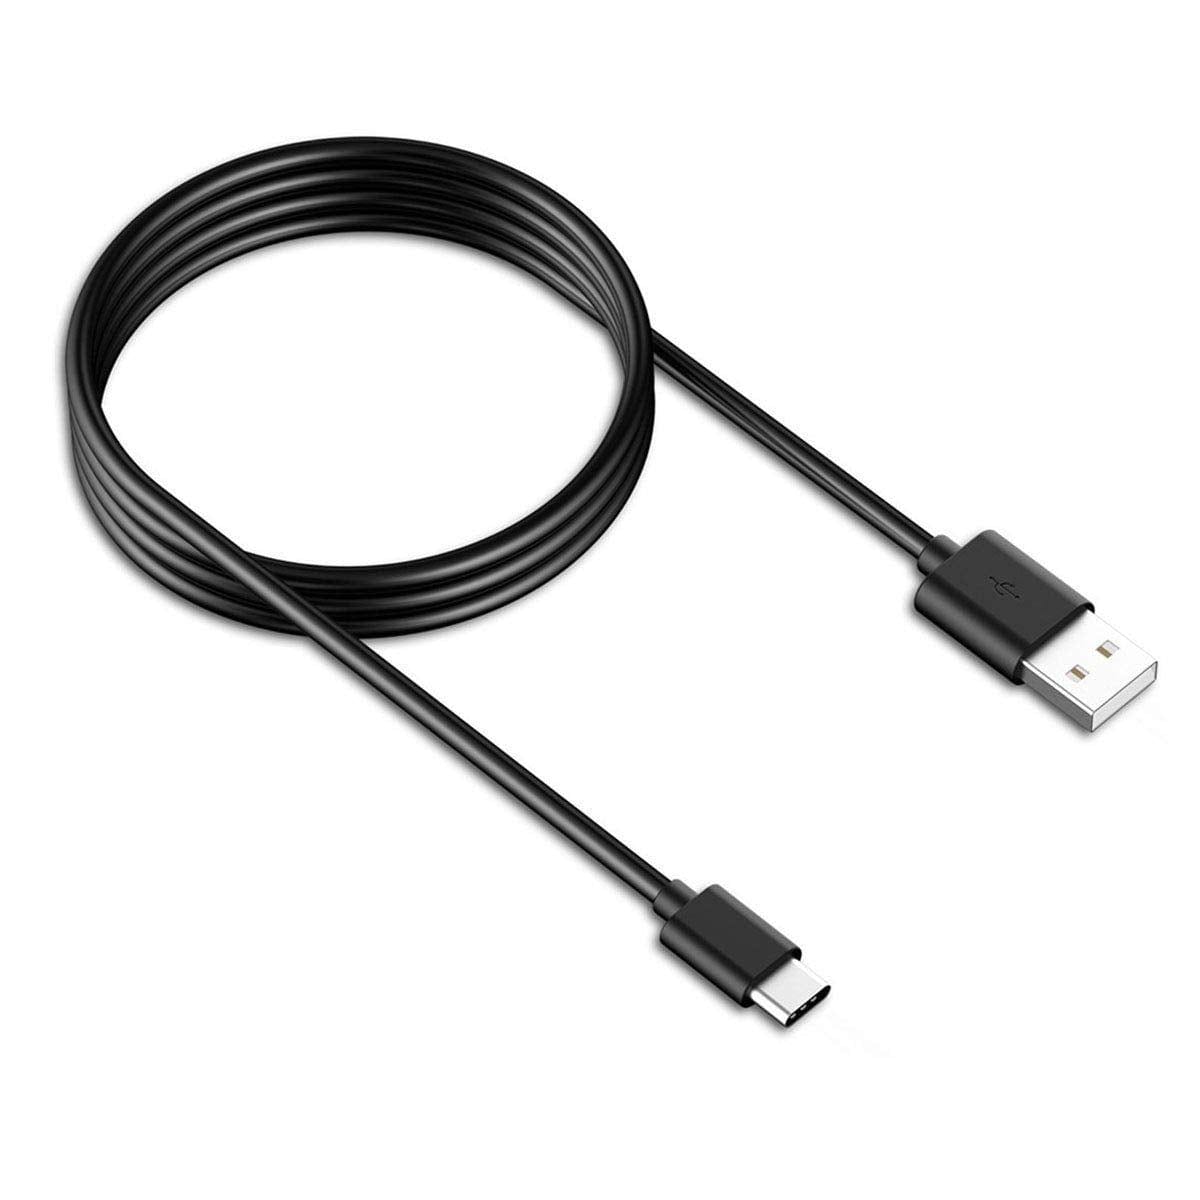 Samsung Galaxy A70 USB Cable to Type C Charging Cable Lead Black - 2M - SmartPhoneGadgetUK